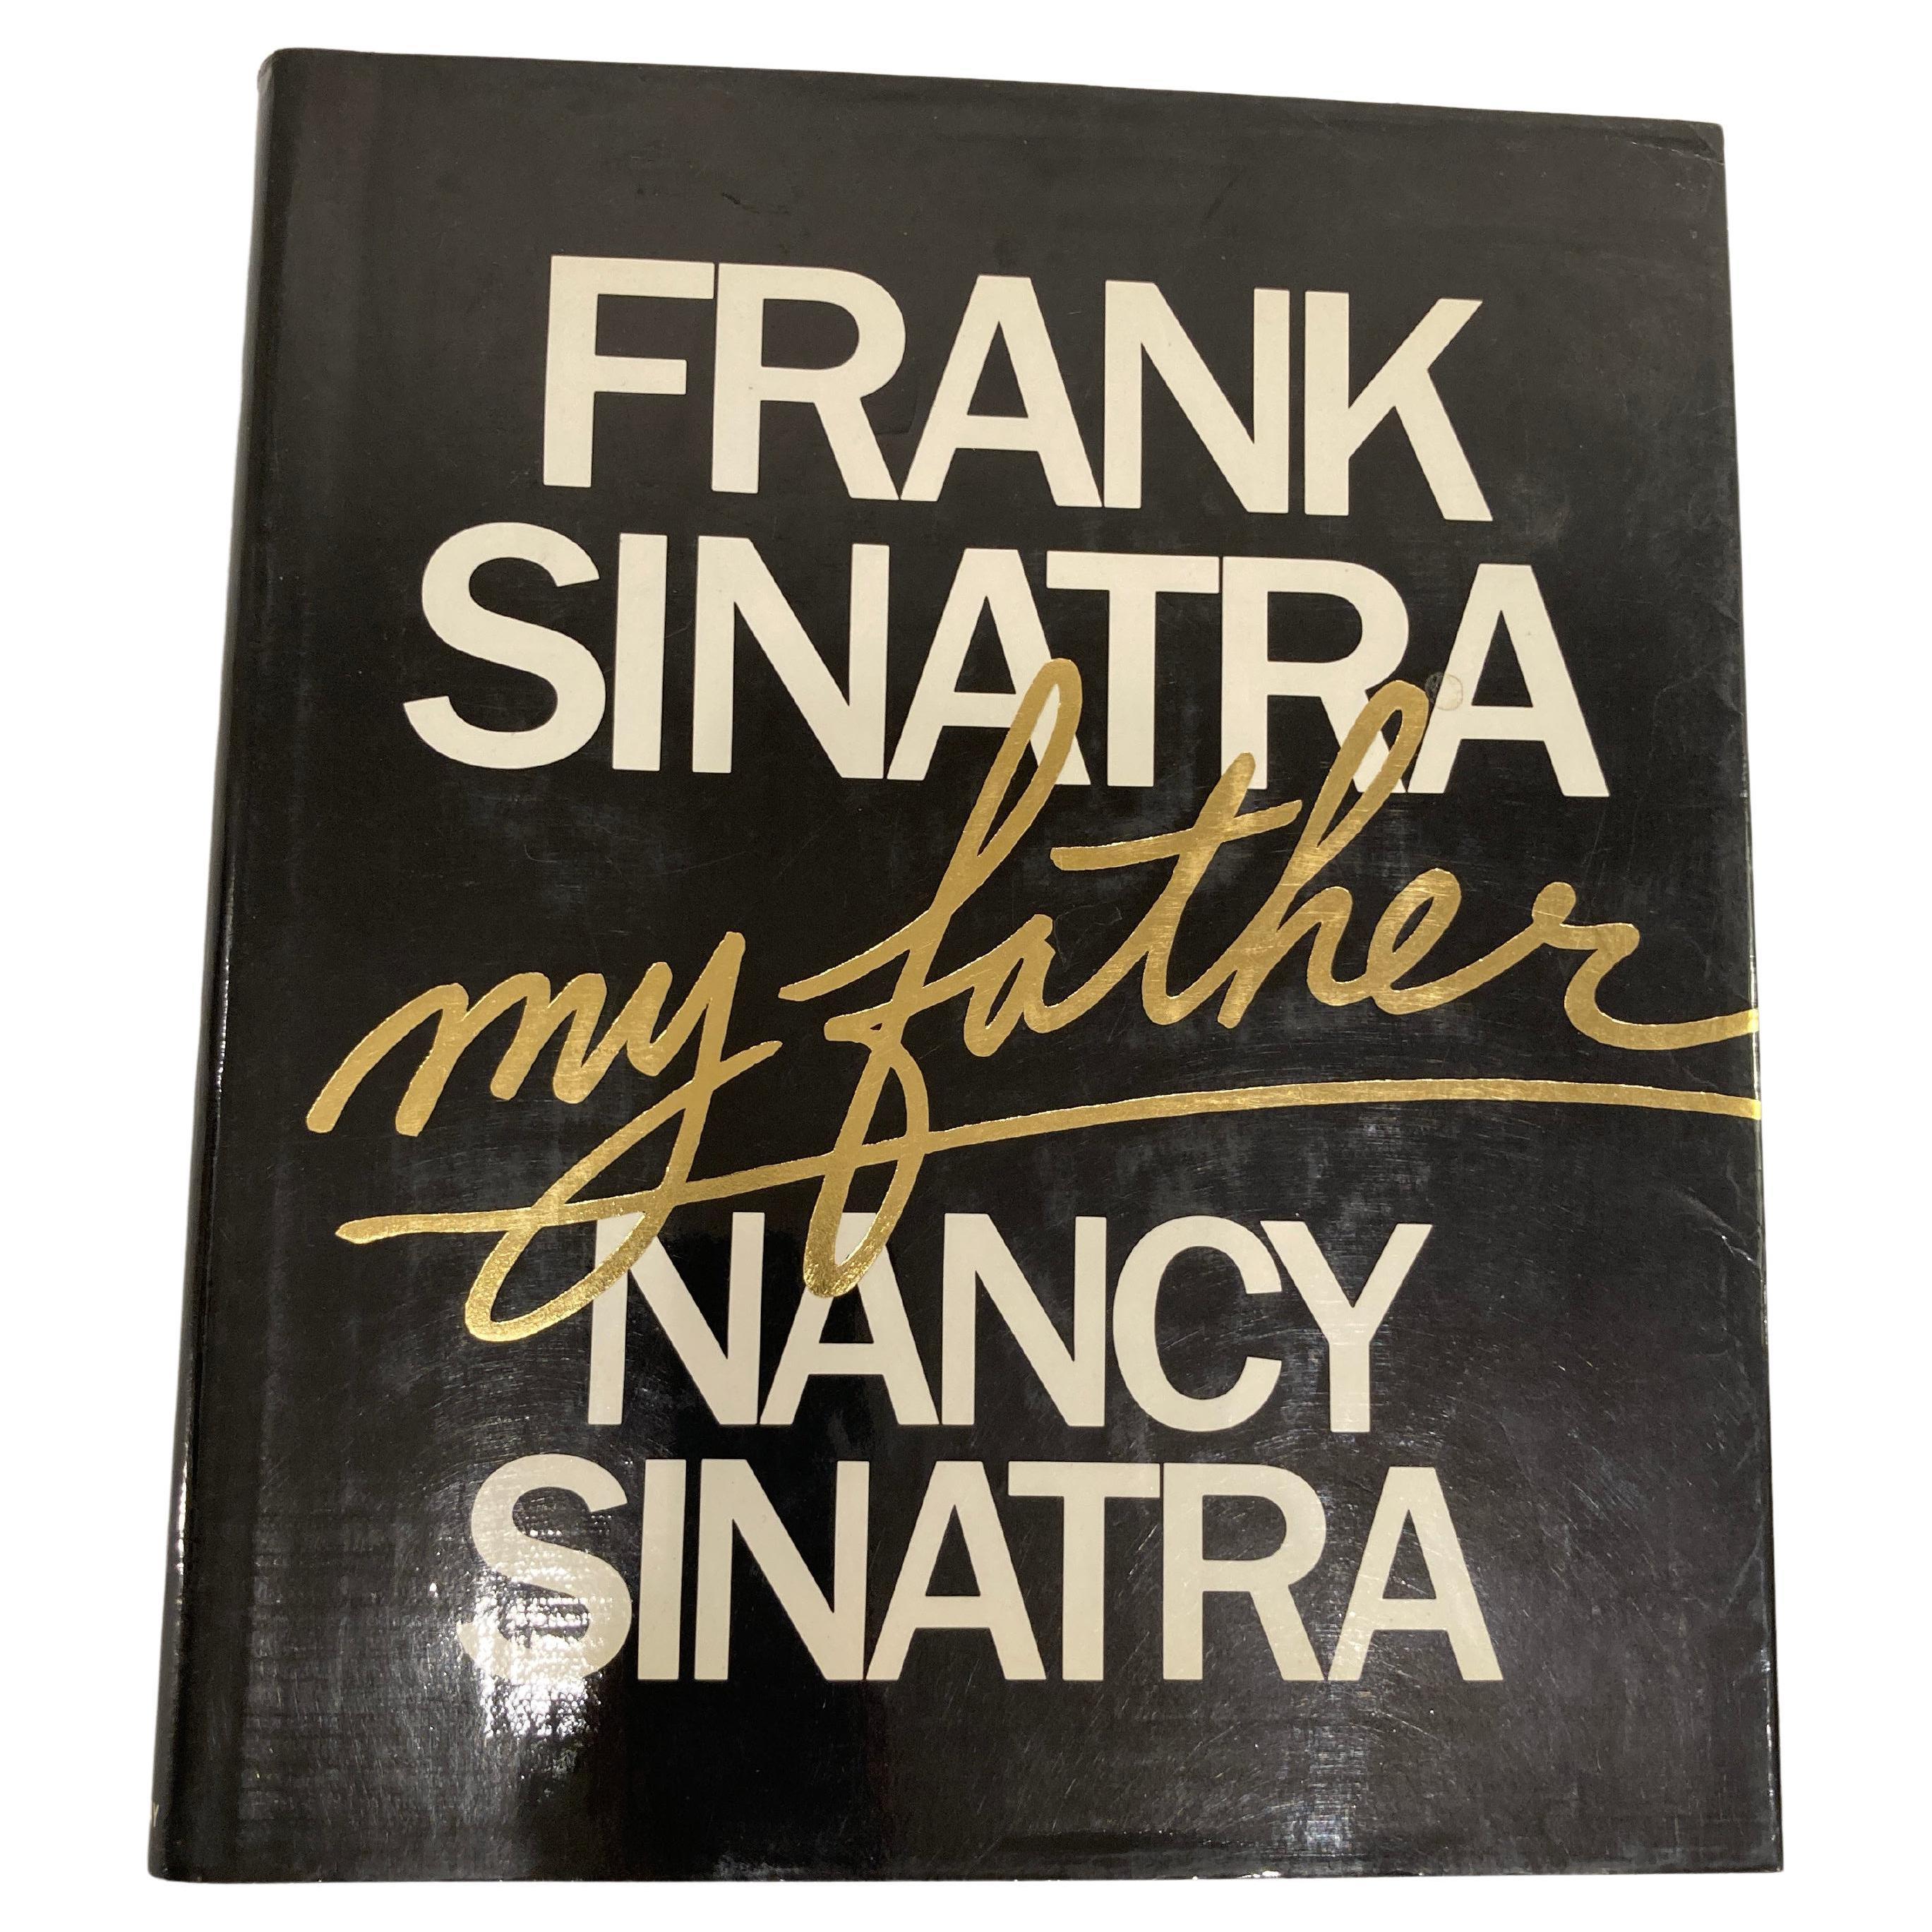 Frank Sinatra, My Father Collectible book by Nancy Sinatra
Here at last is Nancy Sinatra's own story of her legendary father... the only authorized biography of the phenomenal superstar. From his boyhood in Hoboken to his first big breaks, from the